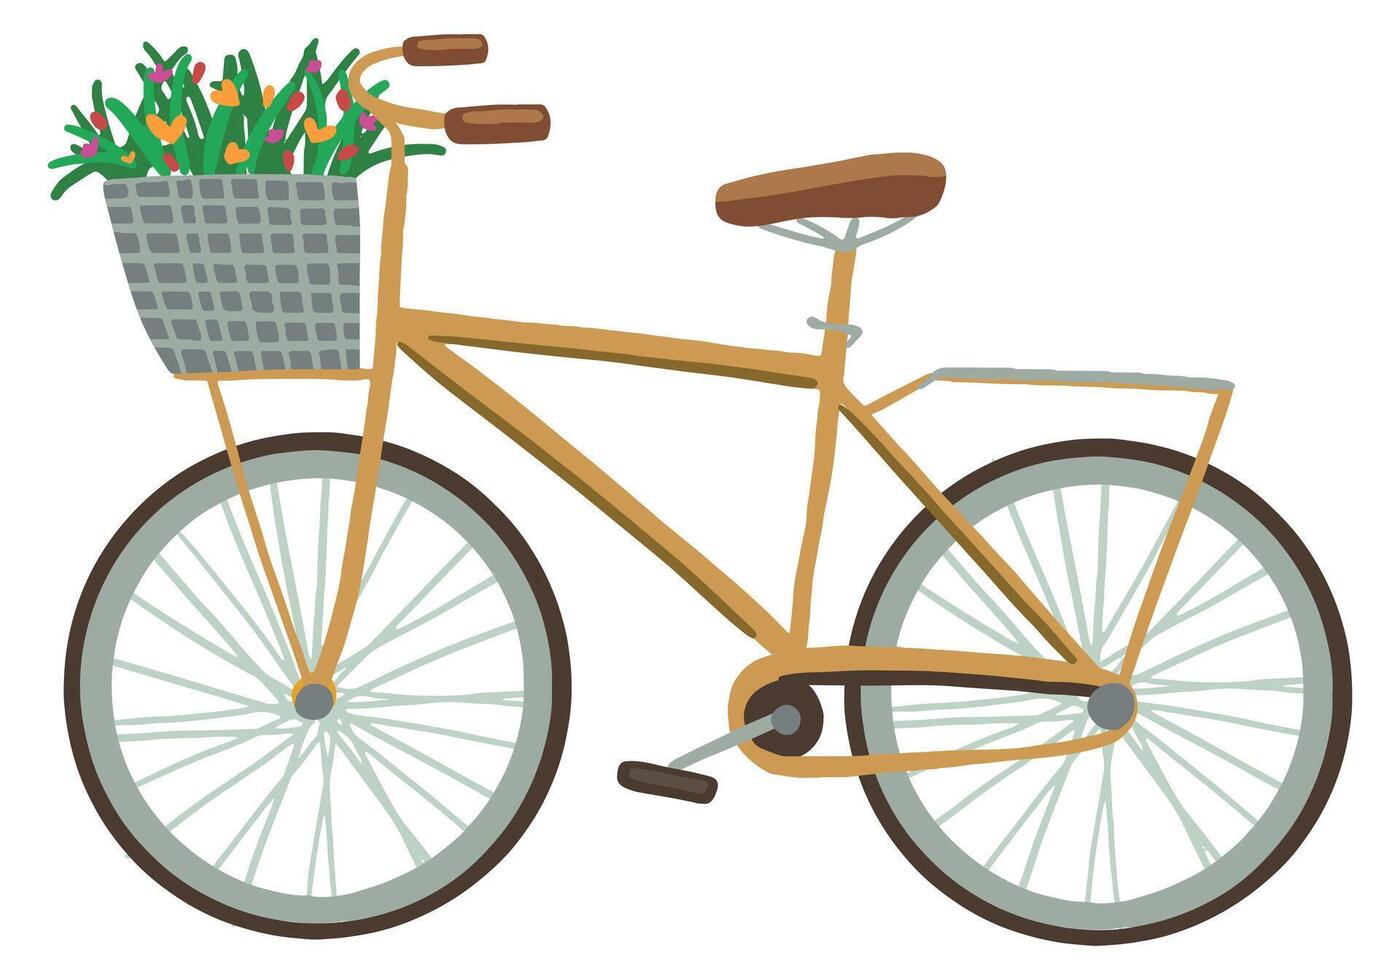 Bicycle with a basket of wildflowers. Hand drawn vector stock illustration. Colored cartoon doodle. Single drawing isolated on white background. Element for design, print, sticker, card, decor, wrap.